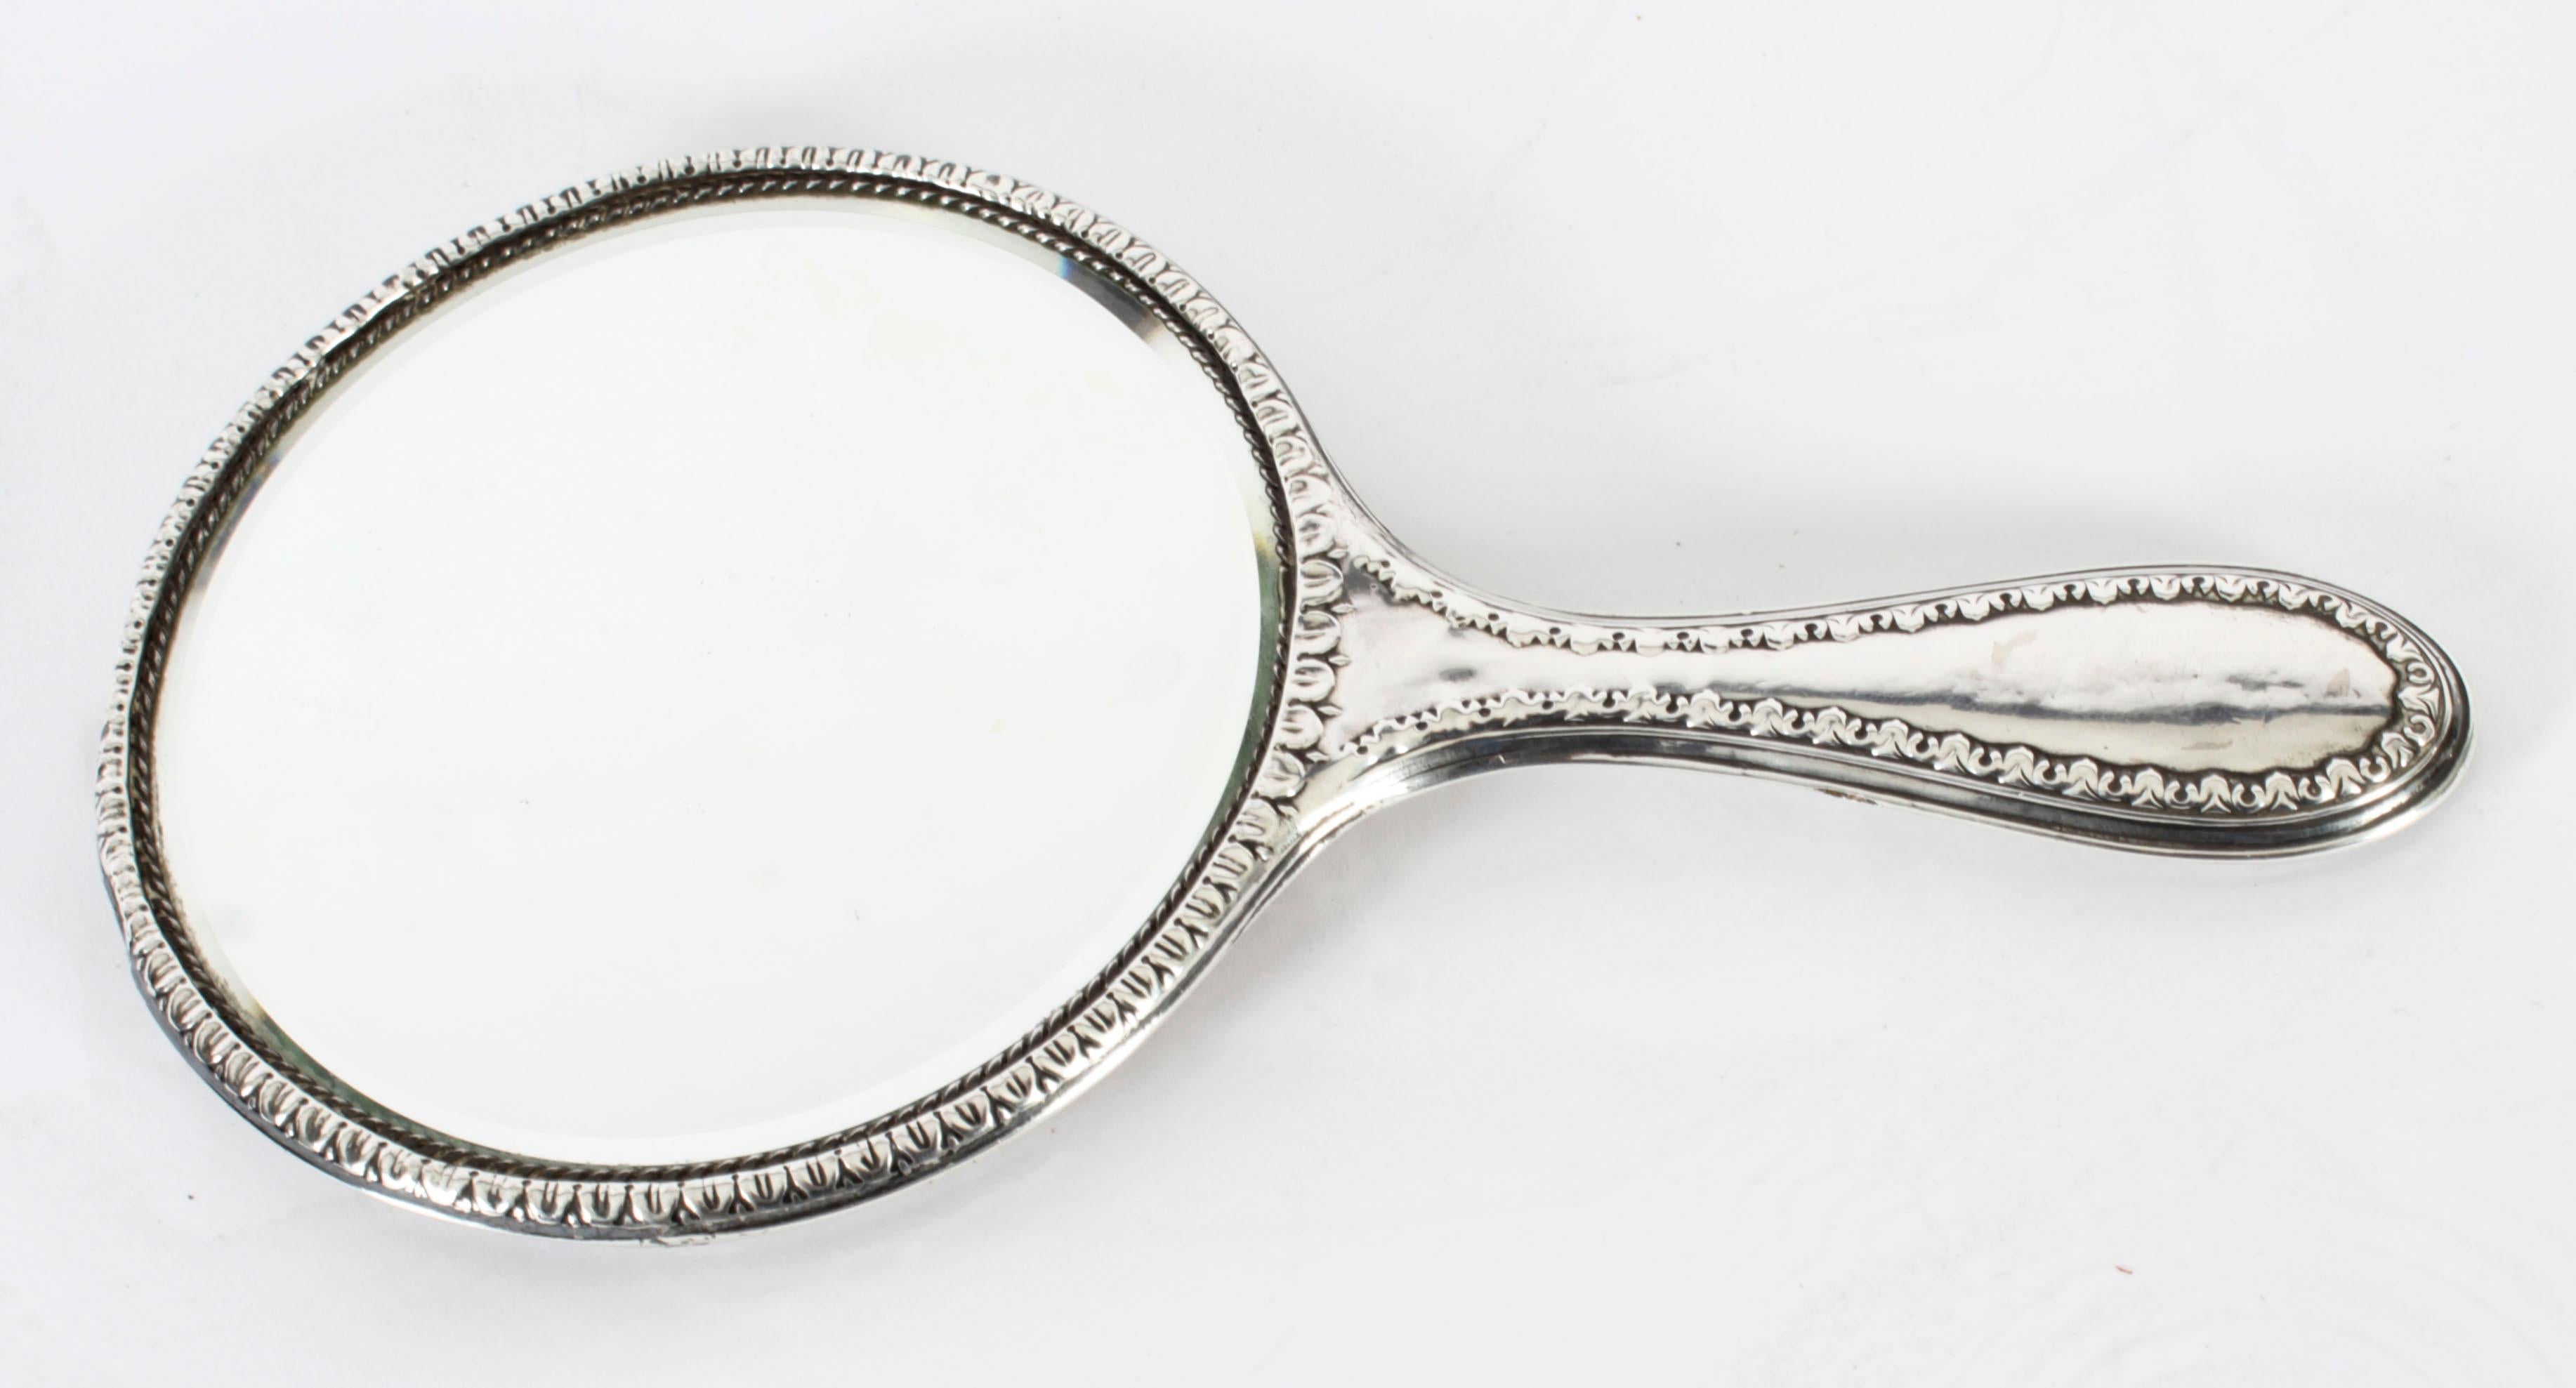 This is a wonderful antique George V sterling silver hand-mirror with hallmarks for Birmingham 1916 and the maker's mark of the renowned silversmiths H Matthews.
 
The vanity bevelled mirror features a heavy embossed solid silver decoration in the